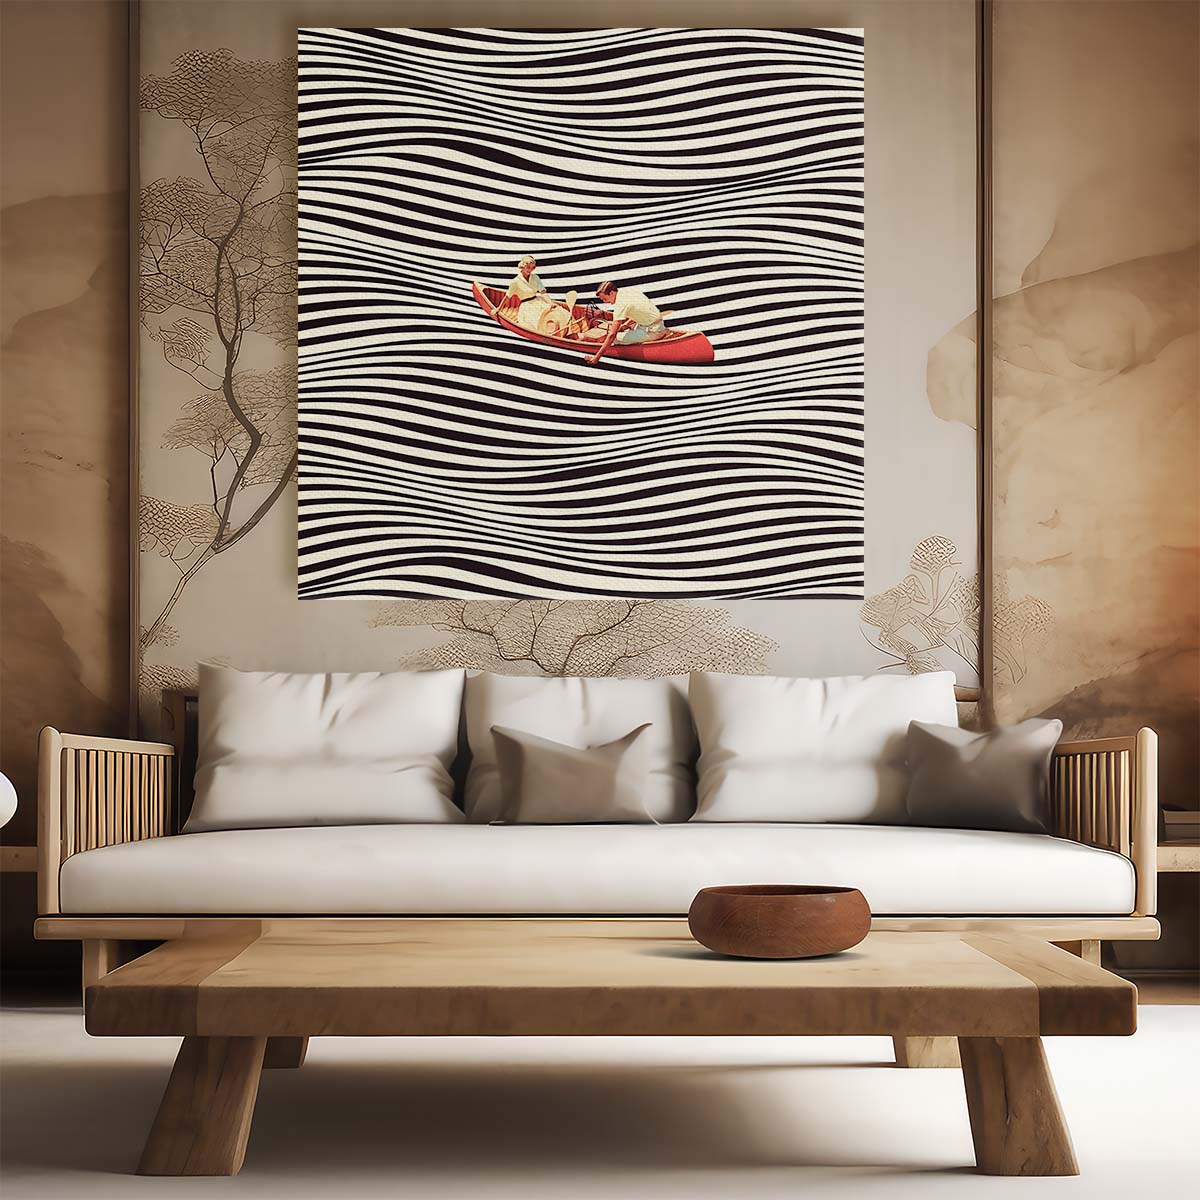 Enchanting Boat Journey Optical Illusion Minimalist Wall Art by Luxuriance Designs. Made in USA.